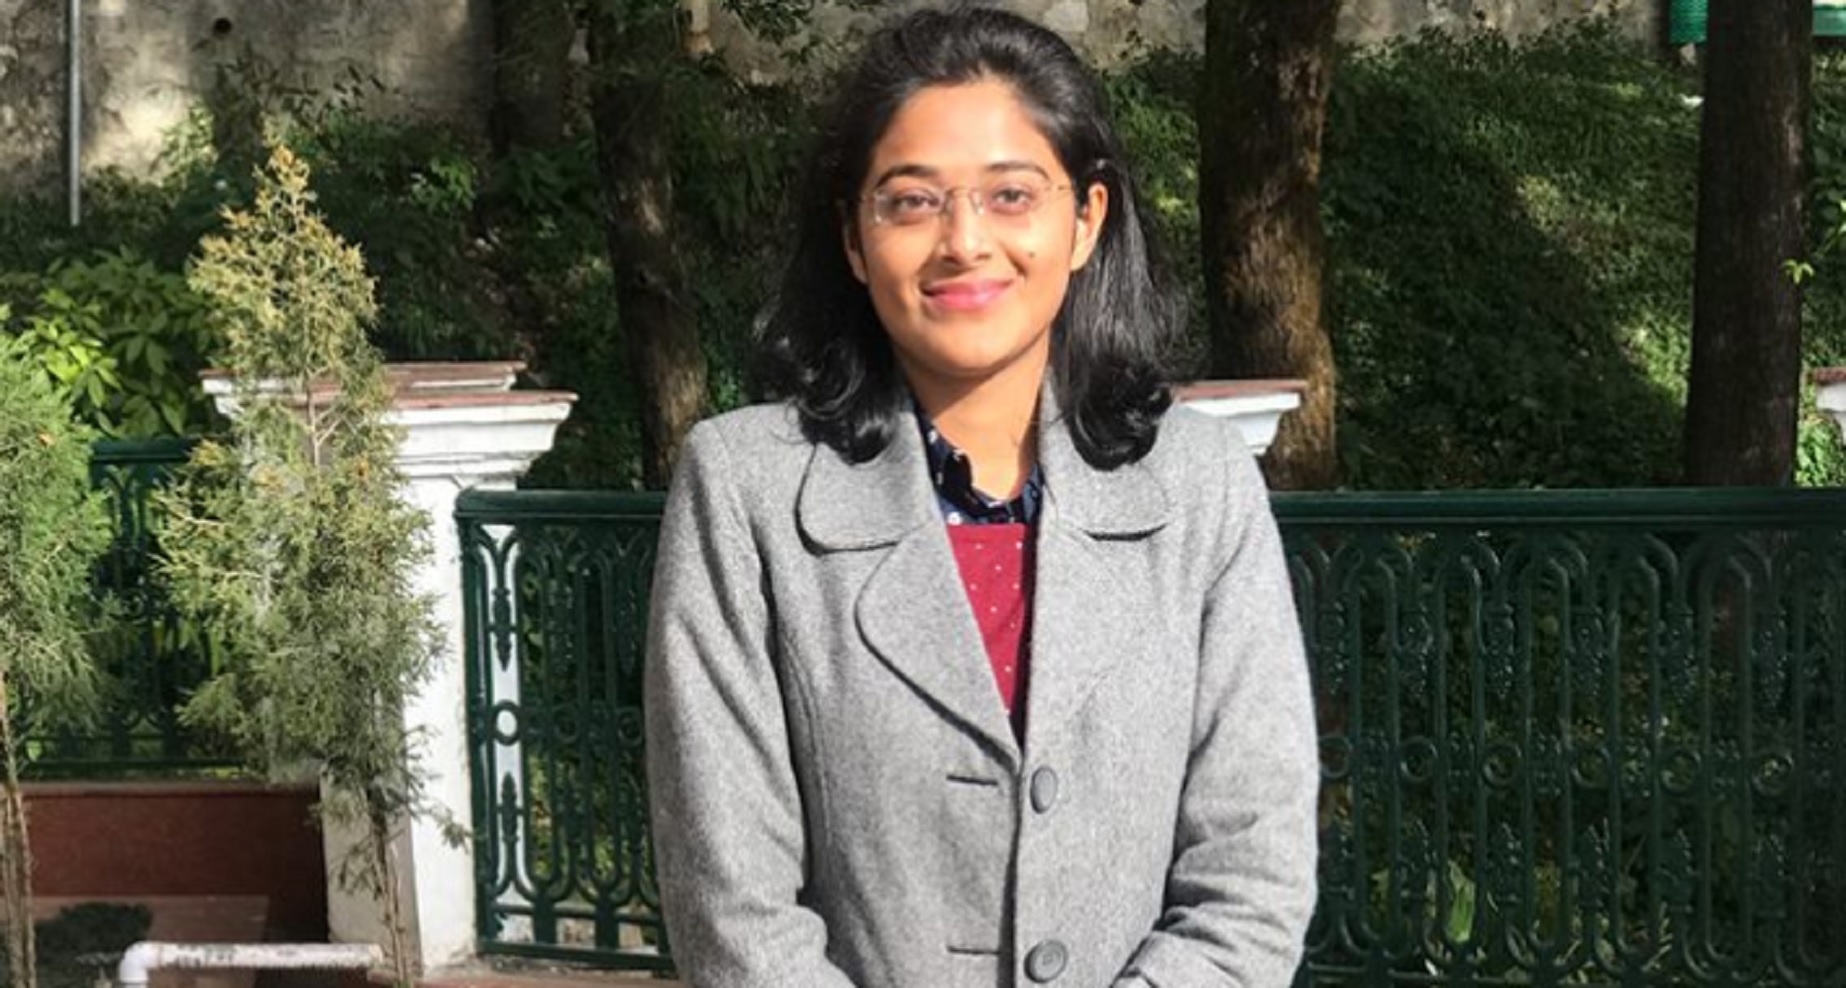 Inspirational: Once Mocked For Her “Poor English”, Surabhi Gautam Clears UPSC In Her First Attempt